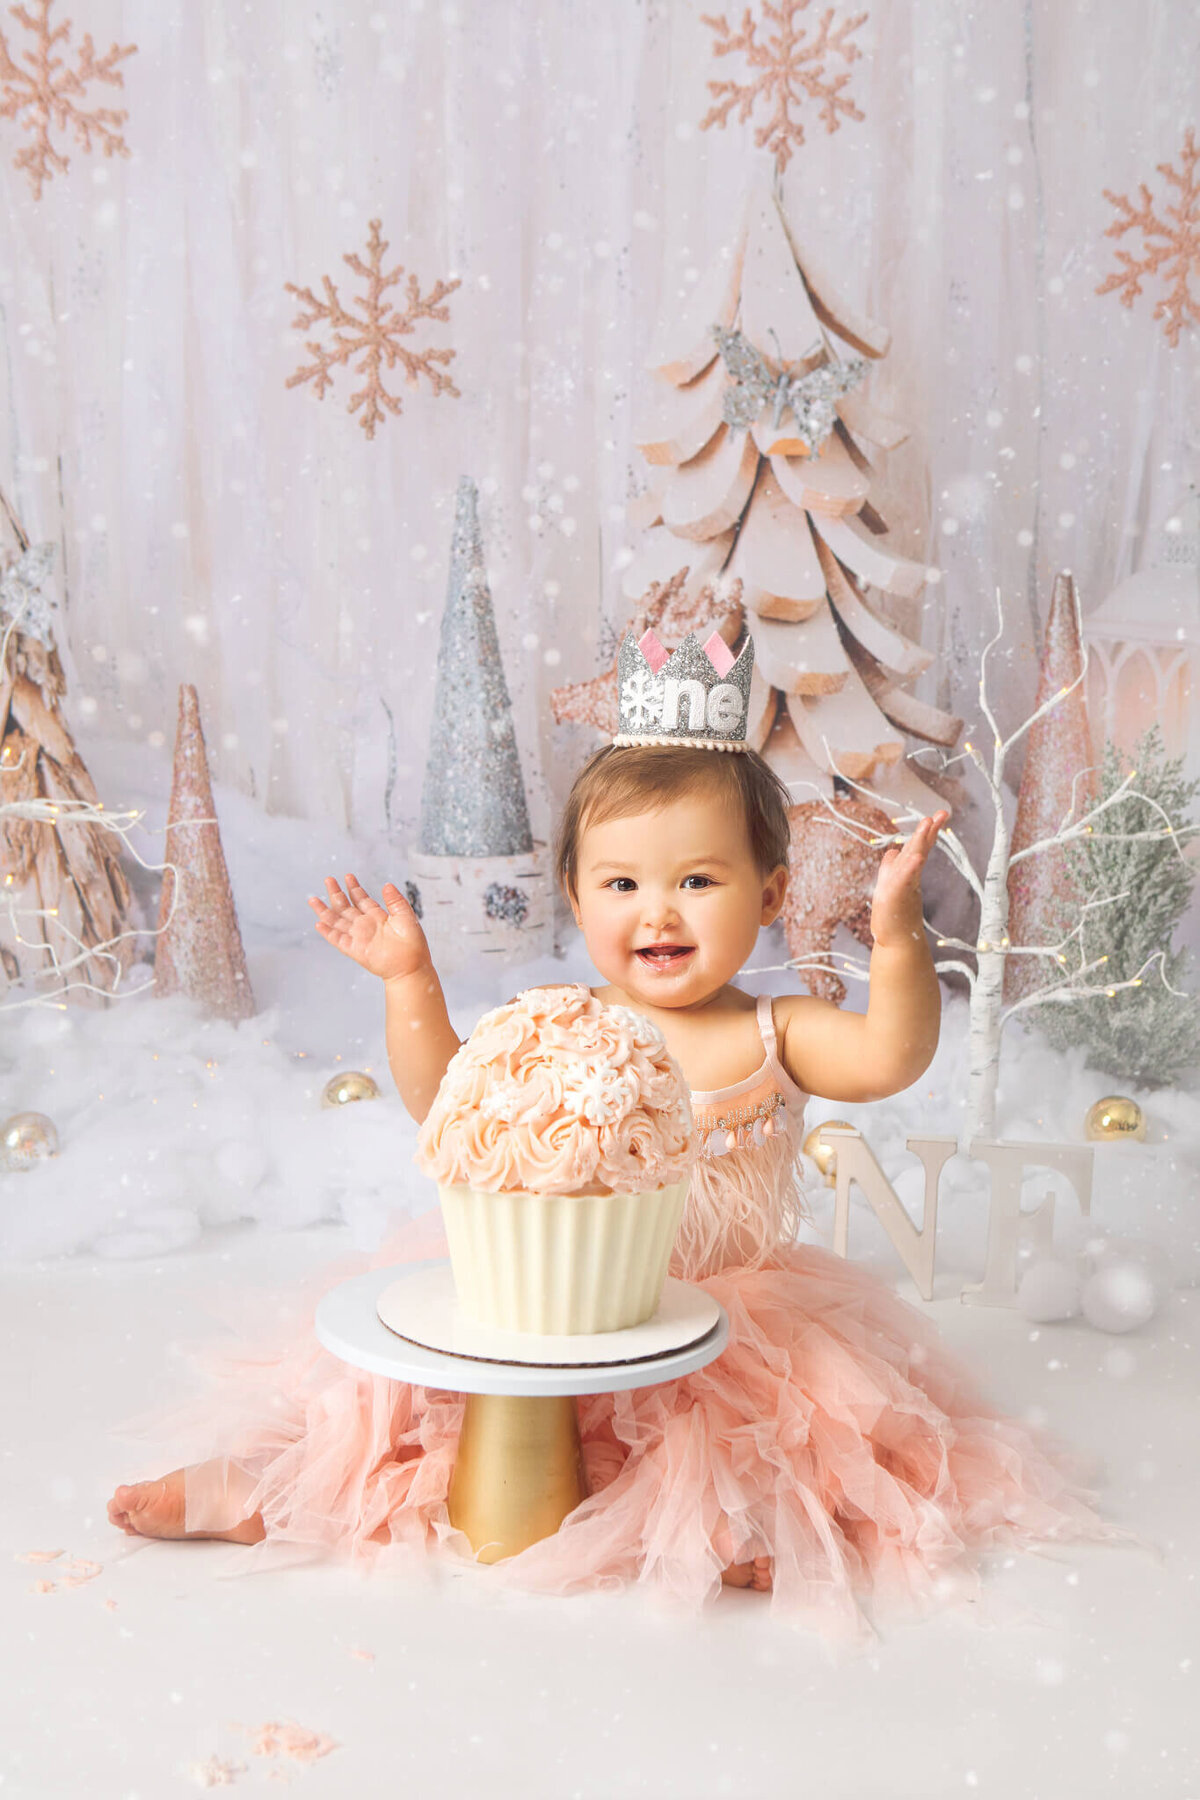 Baby's first cake smash winter onederland theme photographed in Los Angeles by Elsie Rose Photography - Los Angeles newborn photographer